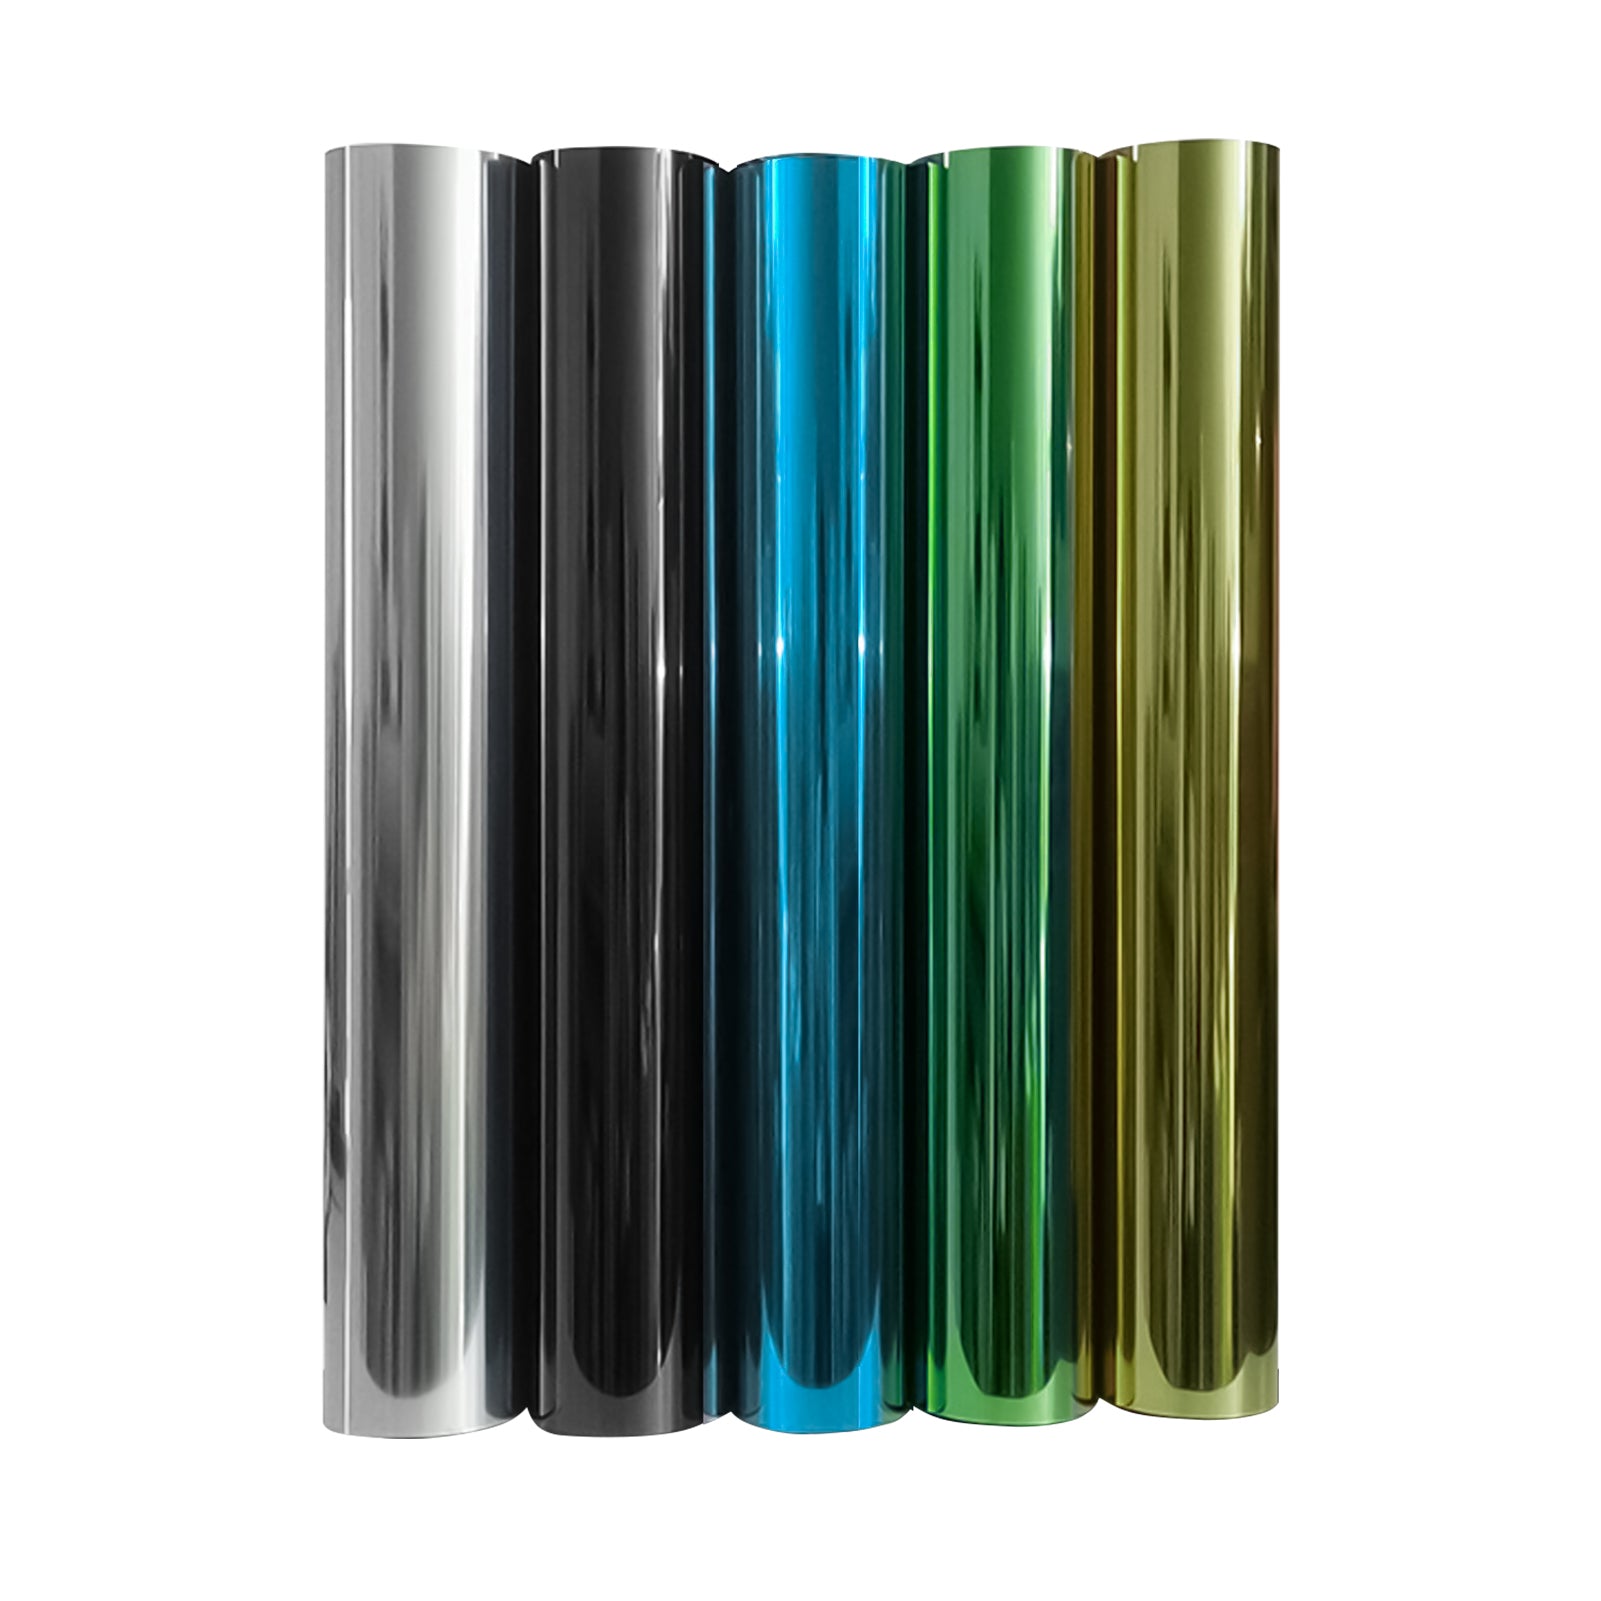 Five metallic rolls of adhesive vinyl in silver, black, blue, green, and gold are lined up vertically next to each other on a white background. The glossy and reflective surfaces make them perfect for use with a 10pcs HTV Heat Transfer Vinyl Paper for Falcon Laser Engraving from CrealityFalcon.